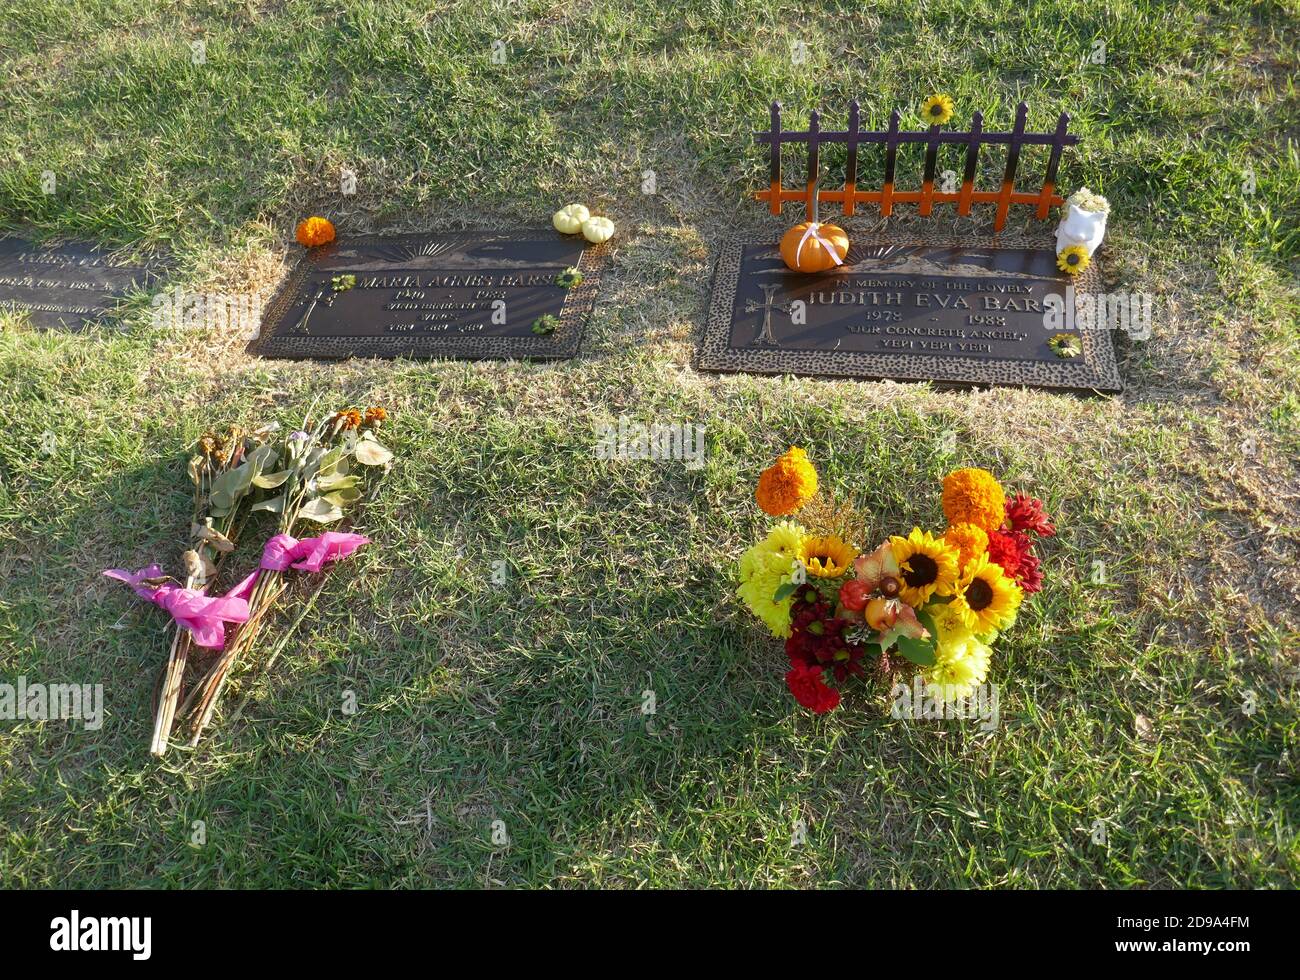 Los Angeles, California, USA 3rd November 2020 A general view of atmosphere of actress Judith Barsi's grave and her mother Maria Virovacz Barsi's Grave at Forest Lawn Hollywood Hills Memorial Park on November 3, 2020 in Los Angeles, California, USA. Photo by Barry King/Alamy Stock Photo Stock Photo